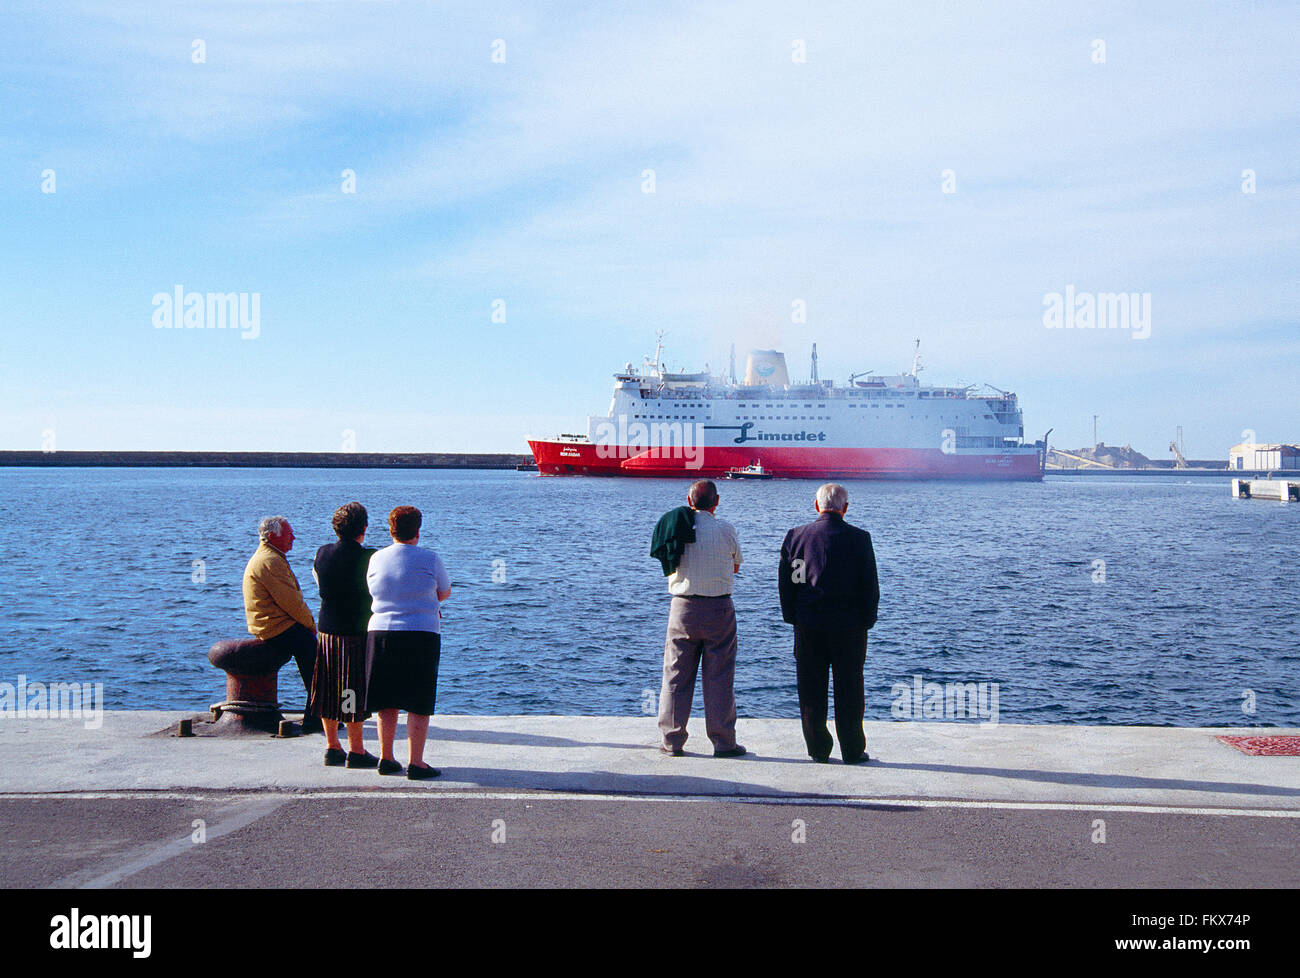 Mature people at the harbour, watching a ship departure. Almeria, Spain. Stock Photo